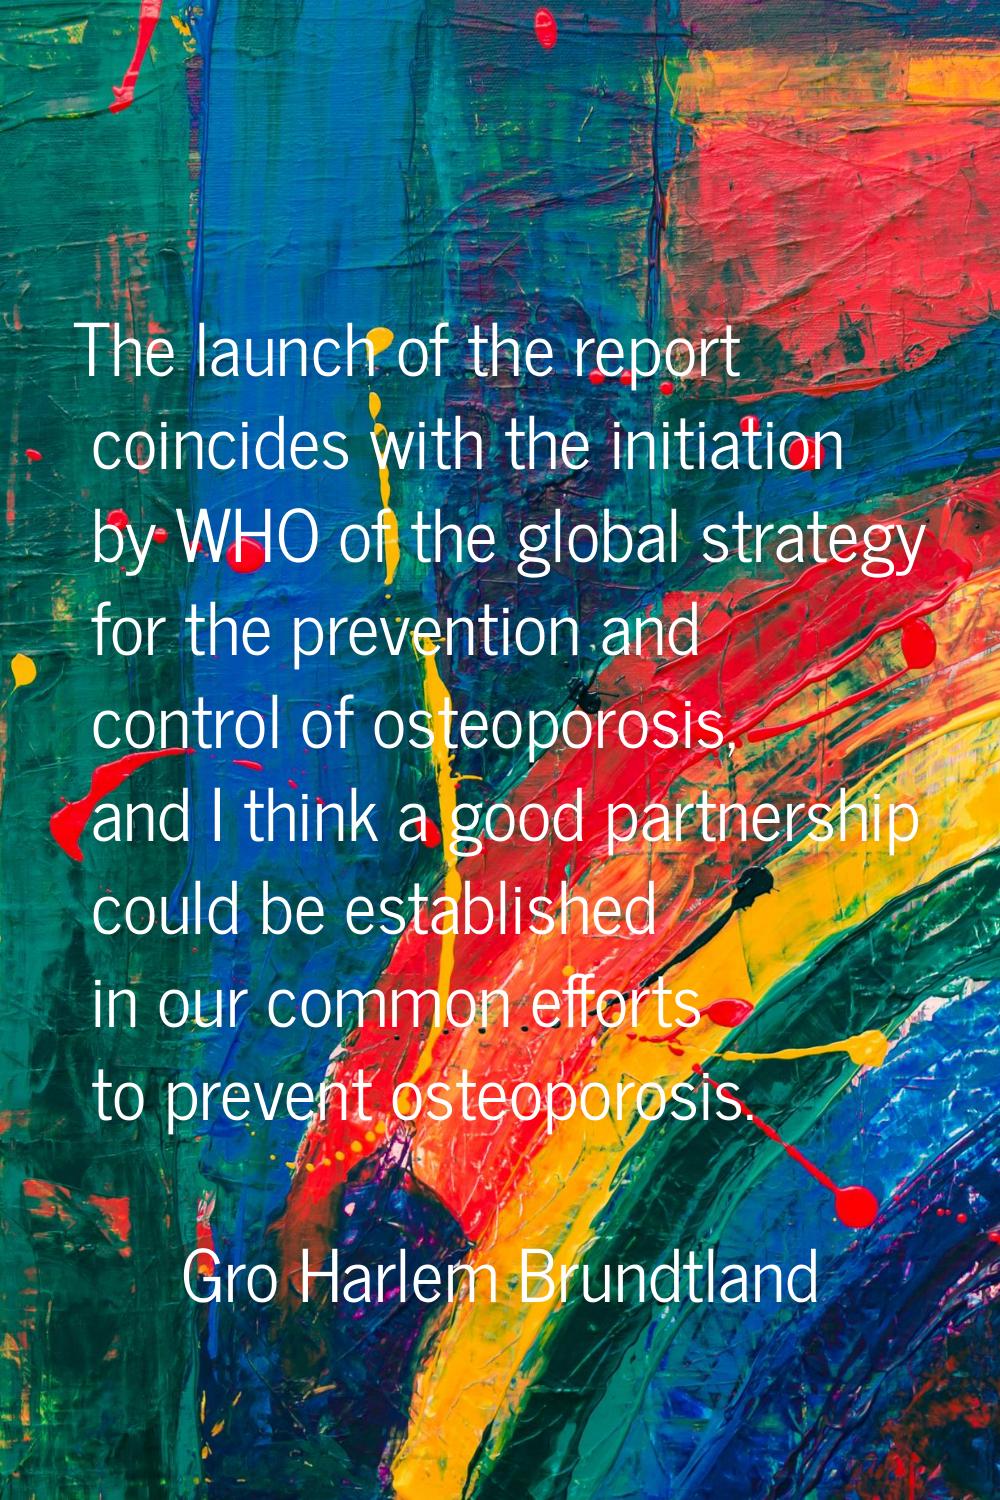 The launch of the report coincides with the initiation by WHO of the global strategy for the preven